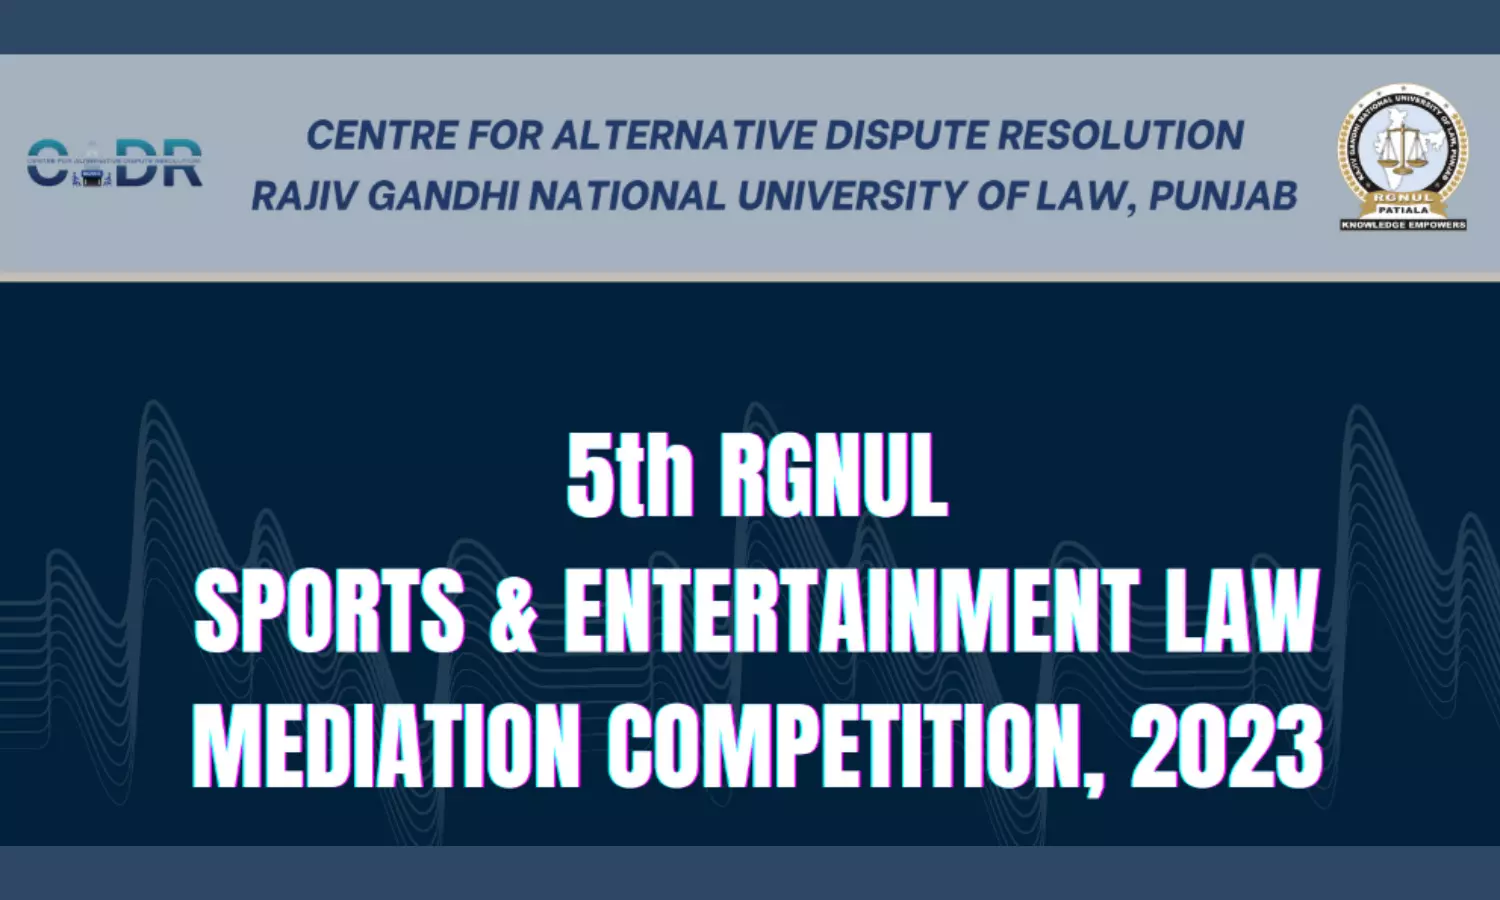 5th RGNUL Sports and Entertainment Law Mediation Competition, 2023 | CADR, RGNUL